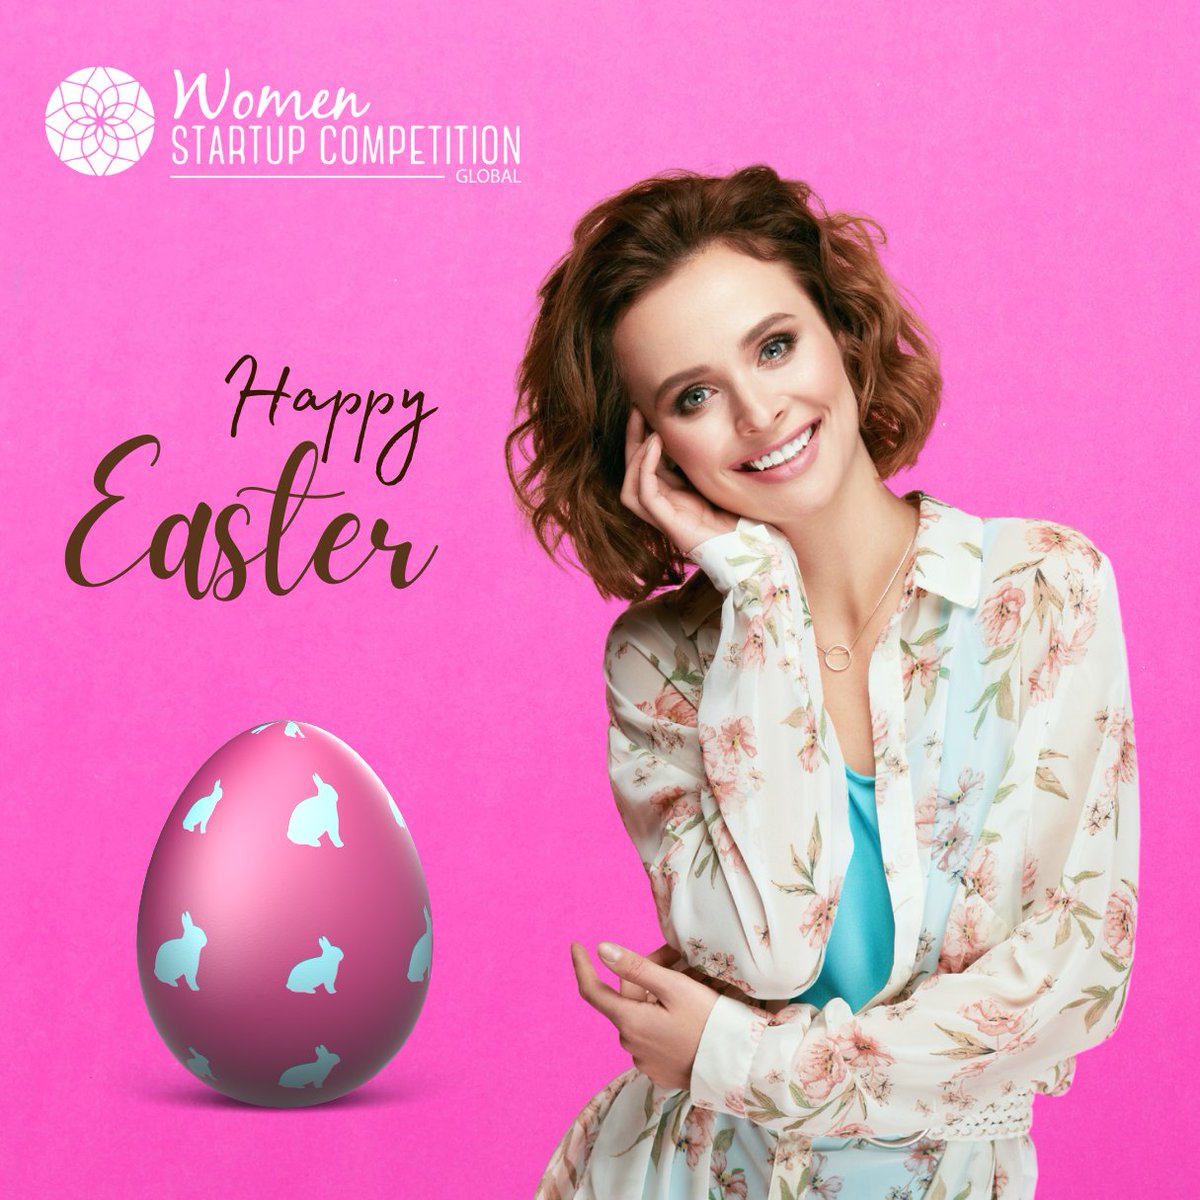 Happy Easter from our team of innovative and powerful women at the Women Startup Competition! 🐰🌷🥚 #Easter2023 #WomenInBusiness #Innovation #Renewal #StartupLife